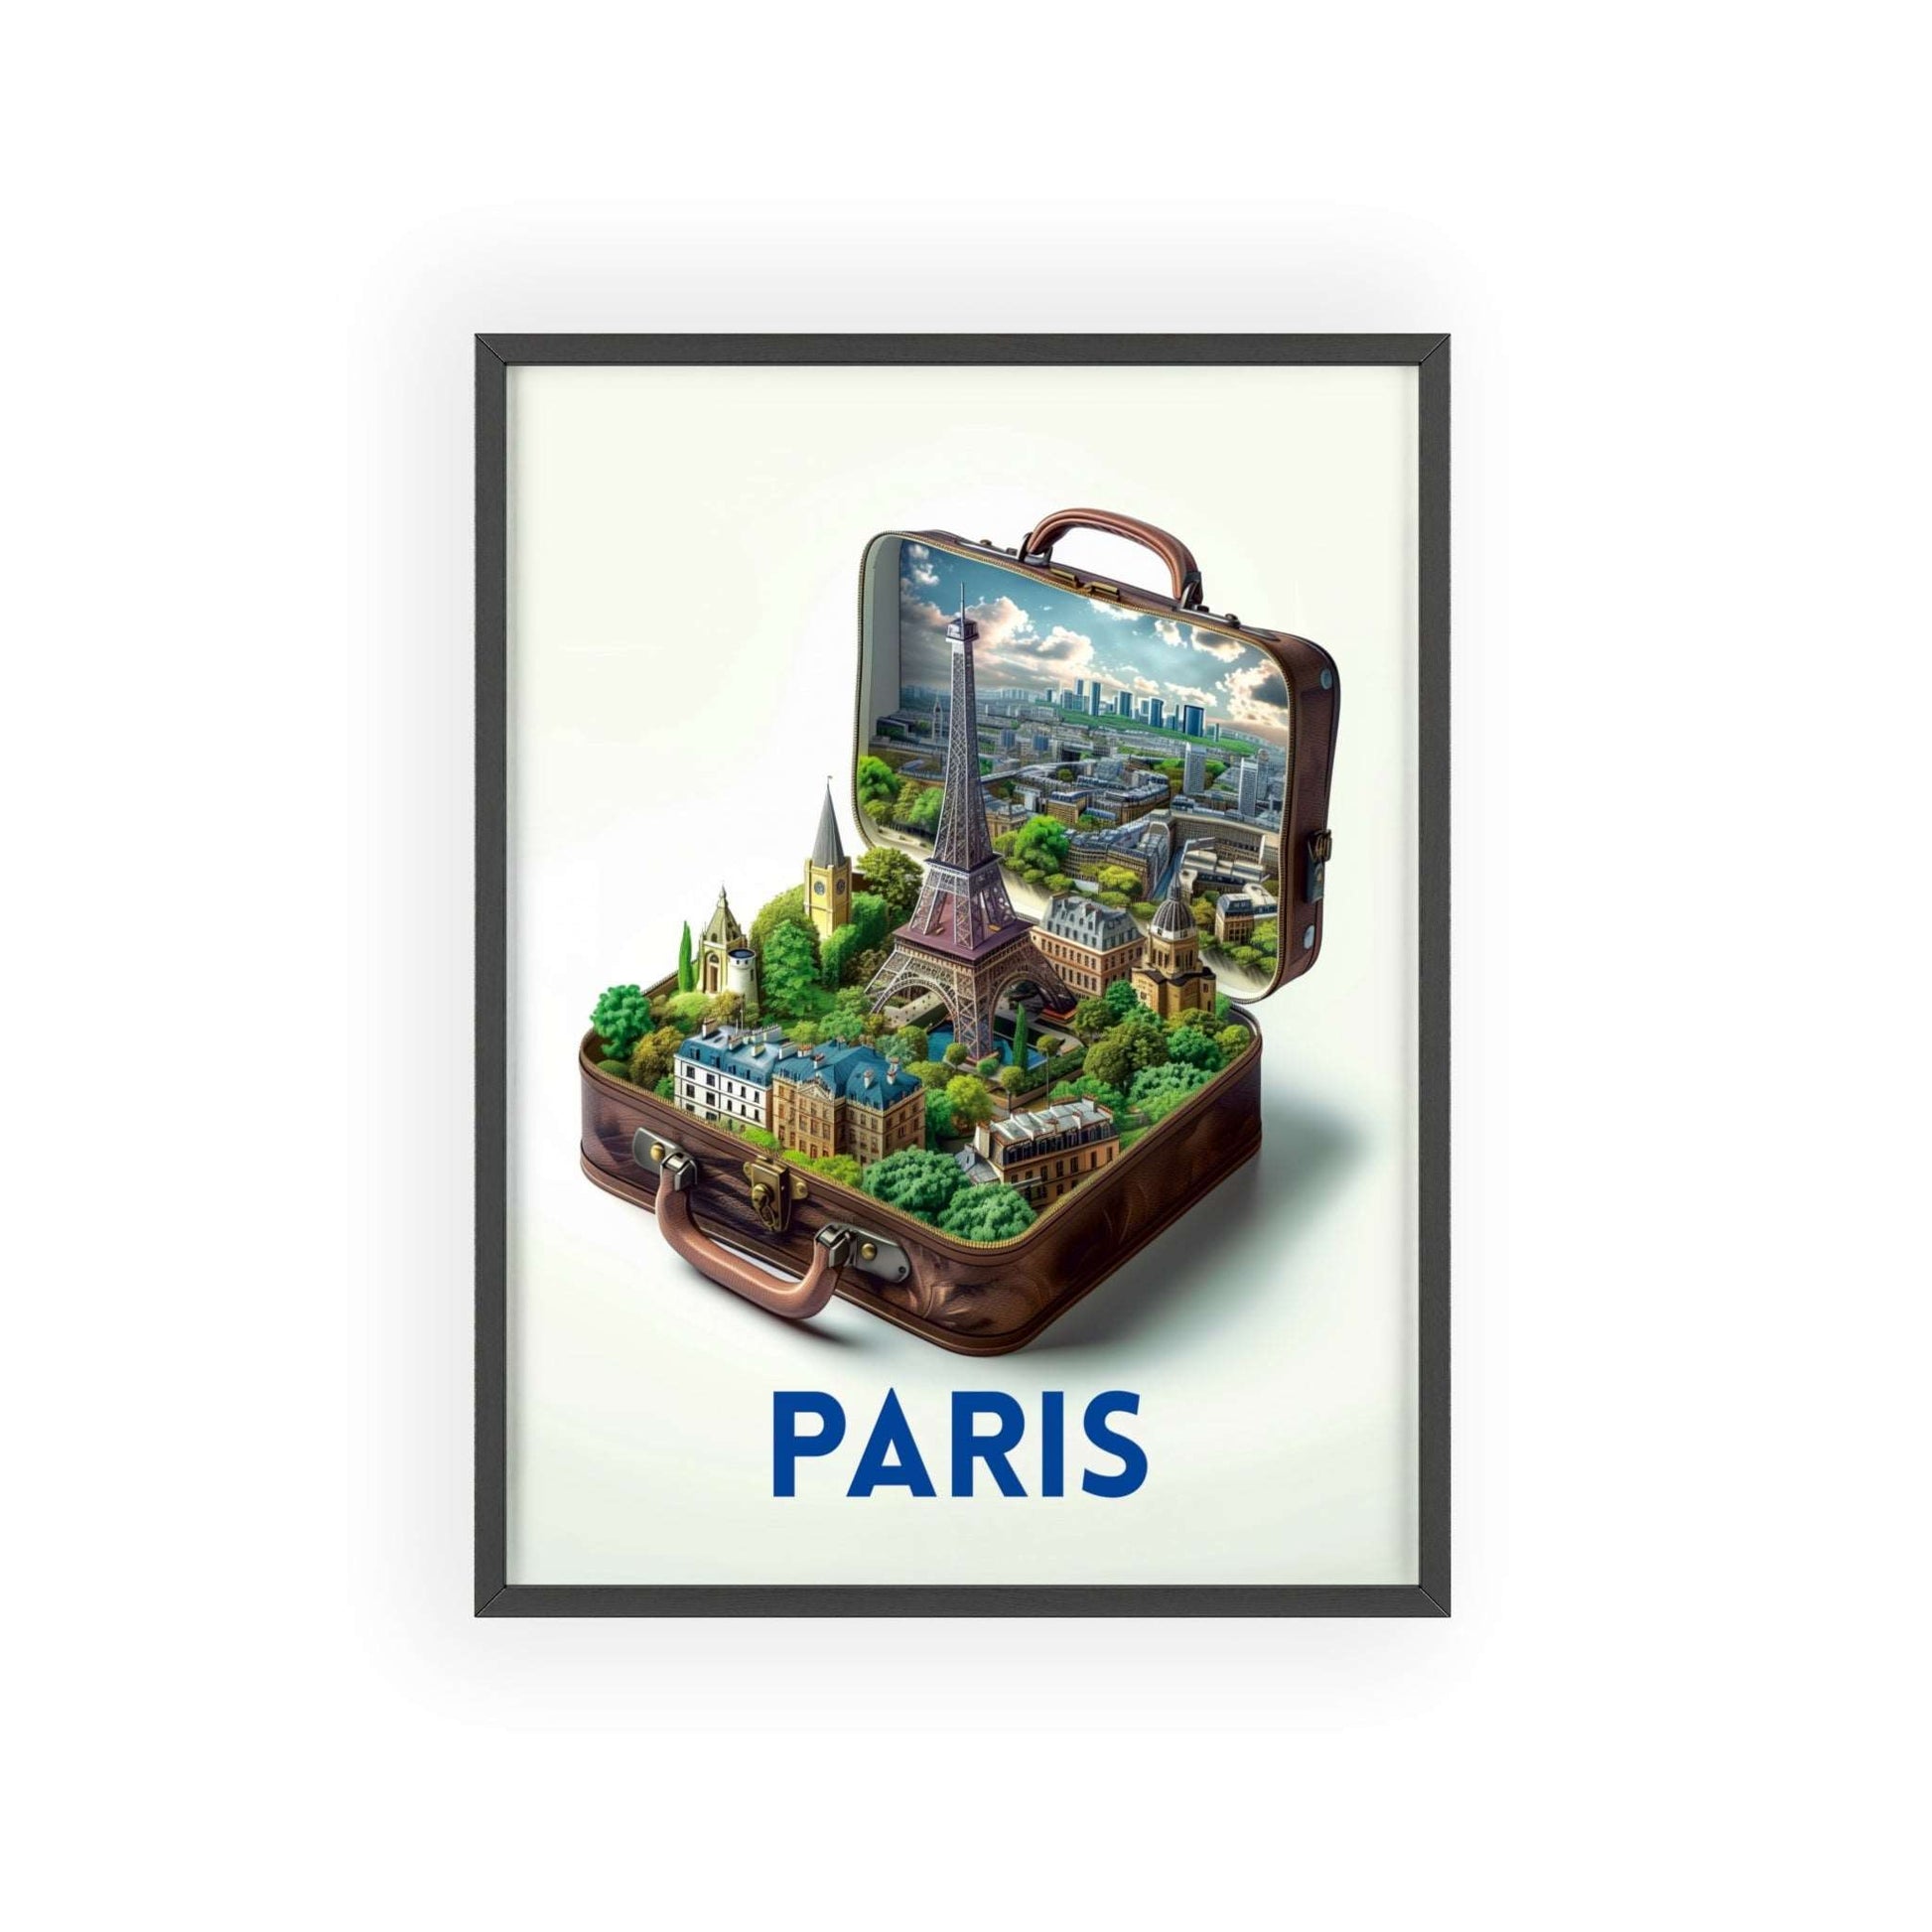 Paris in a Suitcase: Elegant Travel Poster for Timeless Home Decor